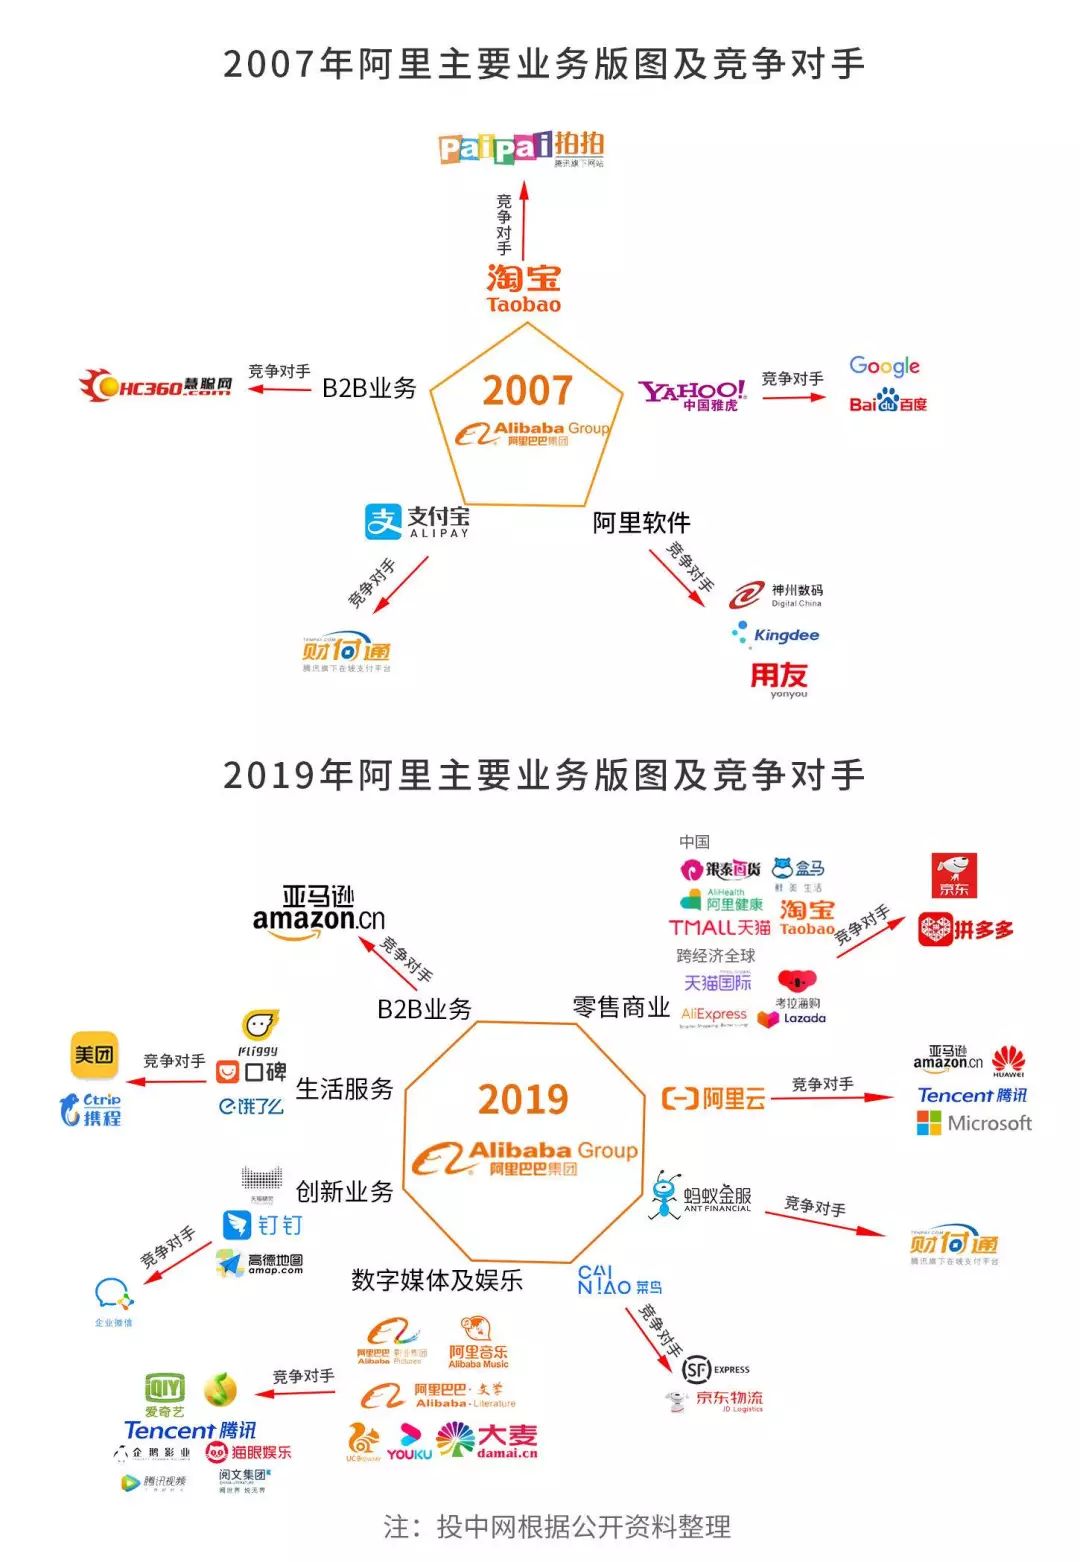 Alibaba Twelve Years: Landing in Hong Kong stocks again, what new changes does it have?